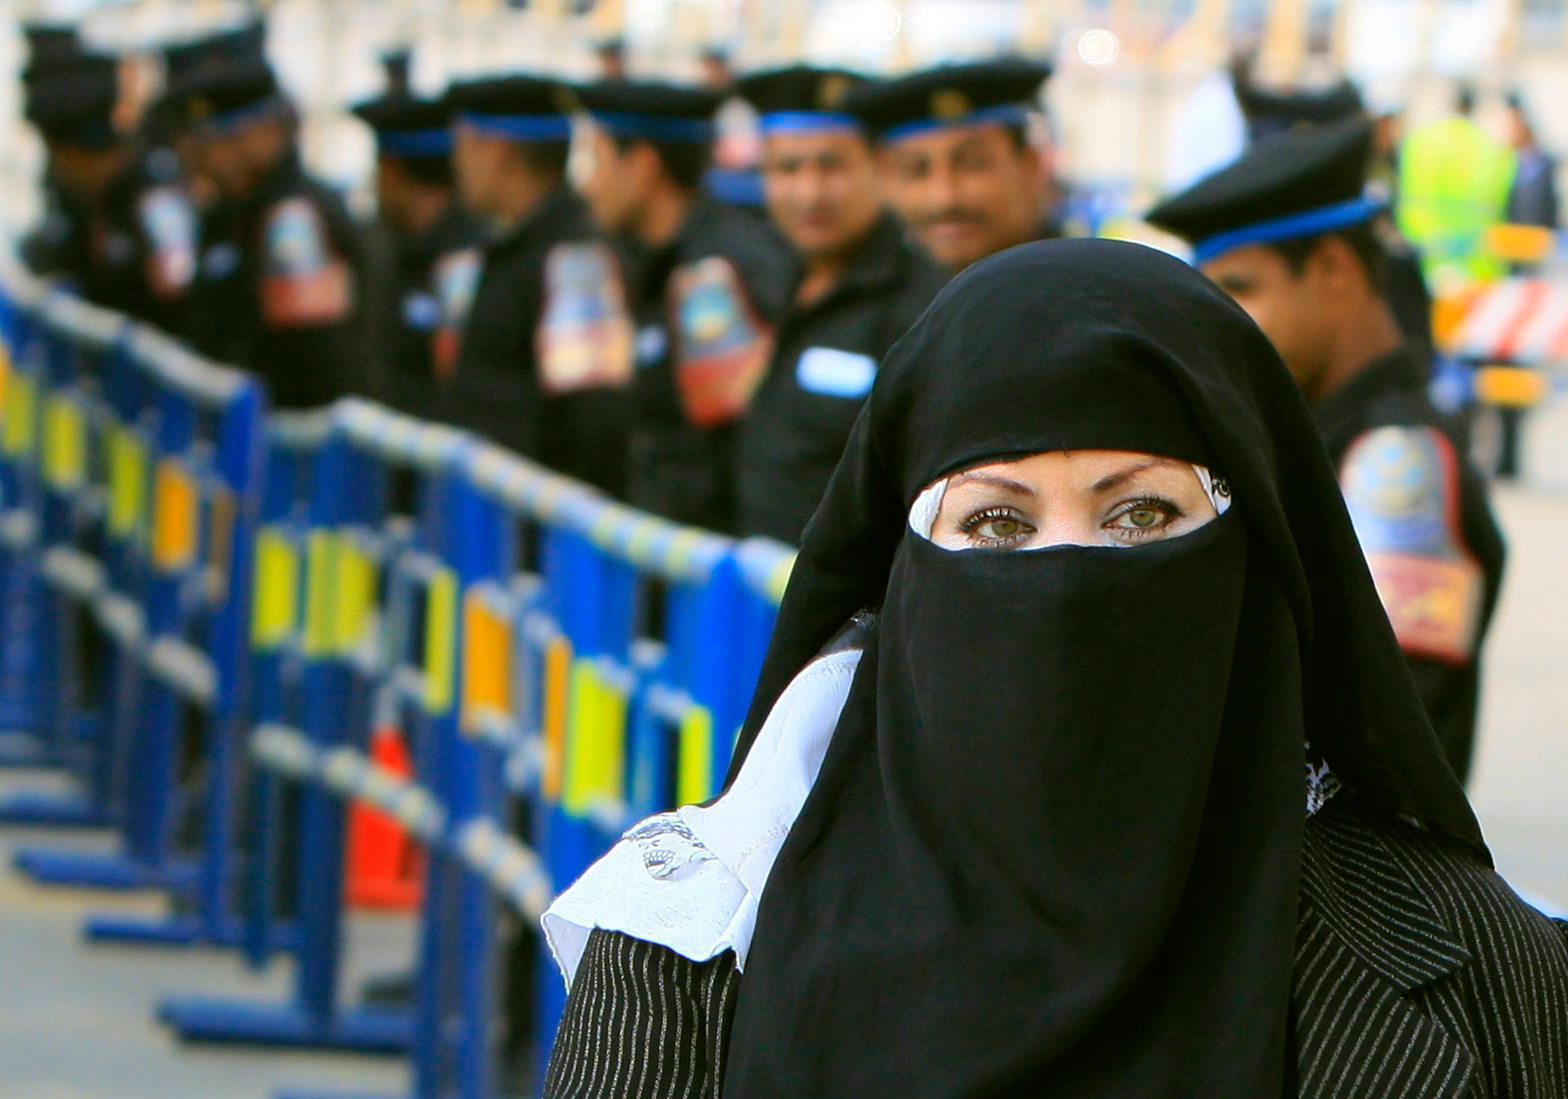 An Egyptian woman wears Islamic " Niqab" , which reveals only the eyes, walks in front of tens of soldiers securing the site of Cairo New court during the verdict of the 26 suspected Hezbollah members, accused of plotting attacks on tourists and shipping in the Suez Canal and sending operatives and explosives to Gaza to help militant groups there, in New Cairo, Egypt, Wednesday, April 28, 2010 . An Egyptian judge has sentenced three suspected Hezbollah members accused of plotting attacks on tourists, including its main Shiite leader, with life in prison. The rest of the suspects received sentences ranging from 15 years to six months. (AP Photo/Amr Nabil)       Mideast Egypt Hezbollah